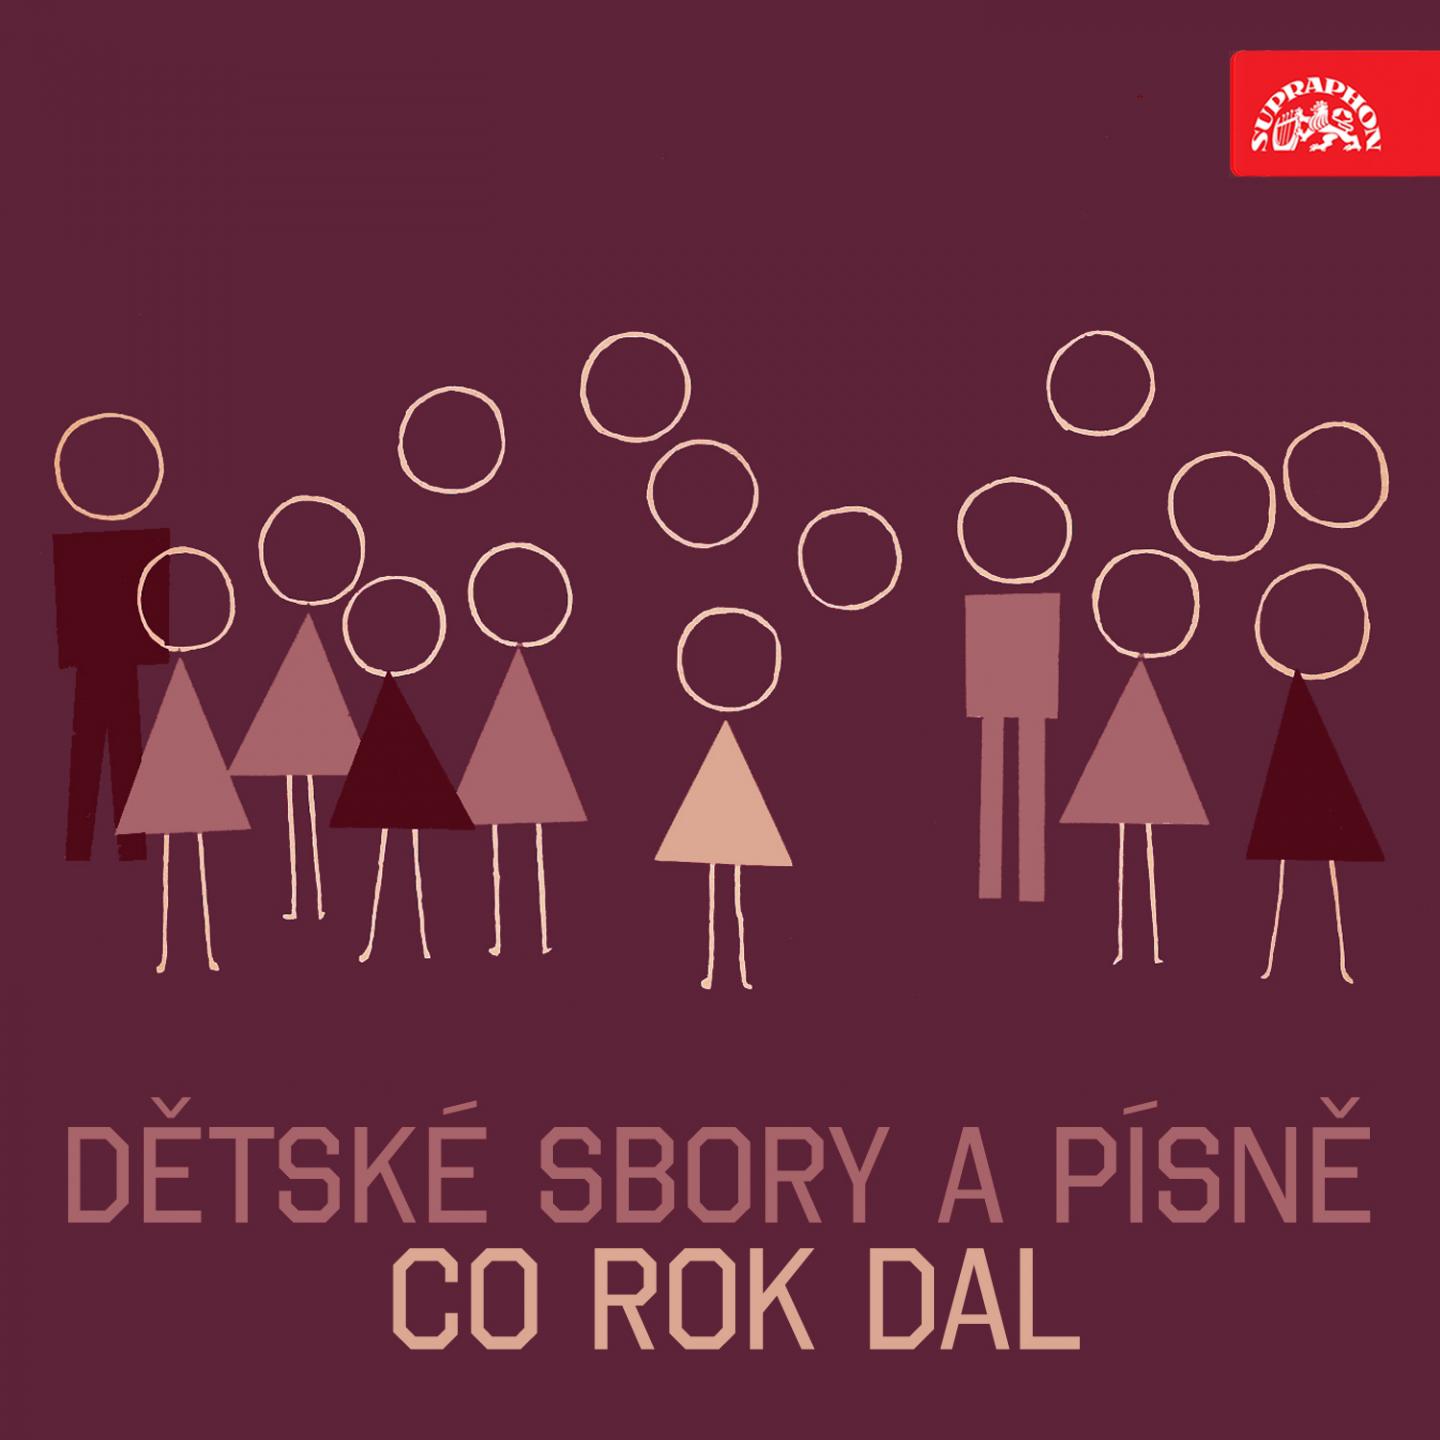 Co rok dal. Children Songs, .: Ma mo, ma mo, co to bylo